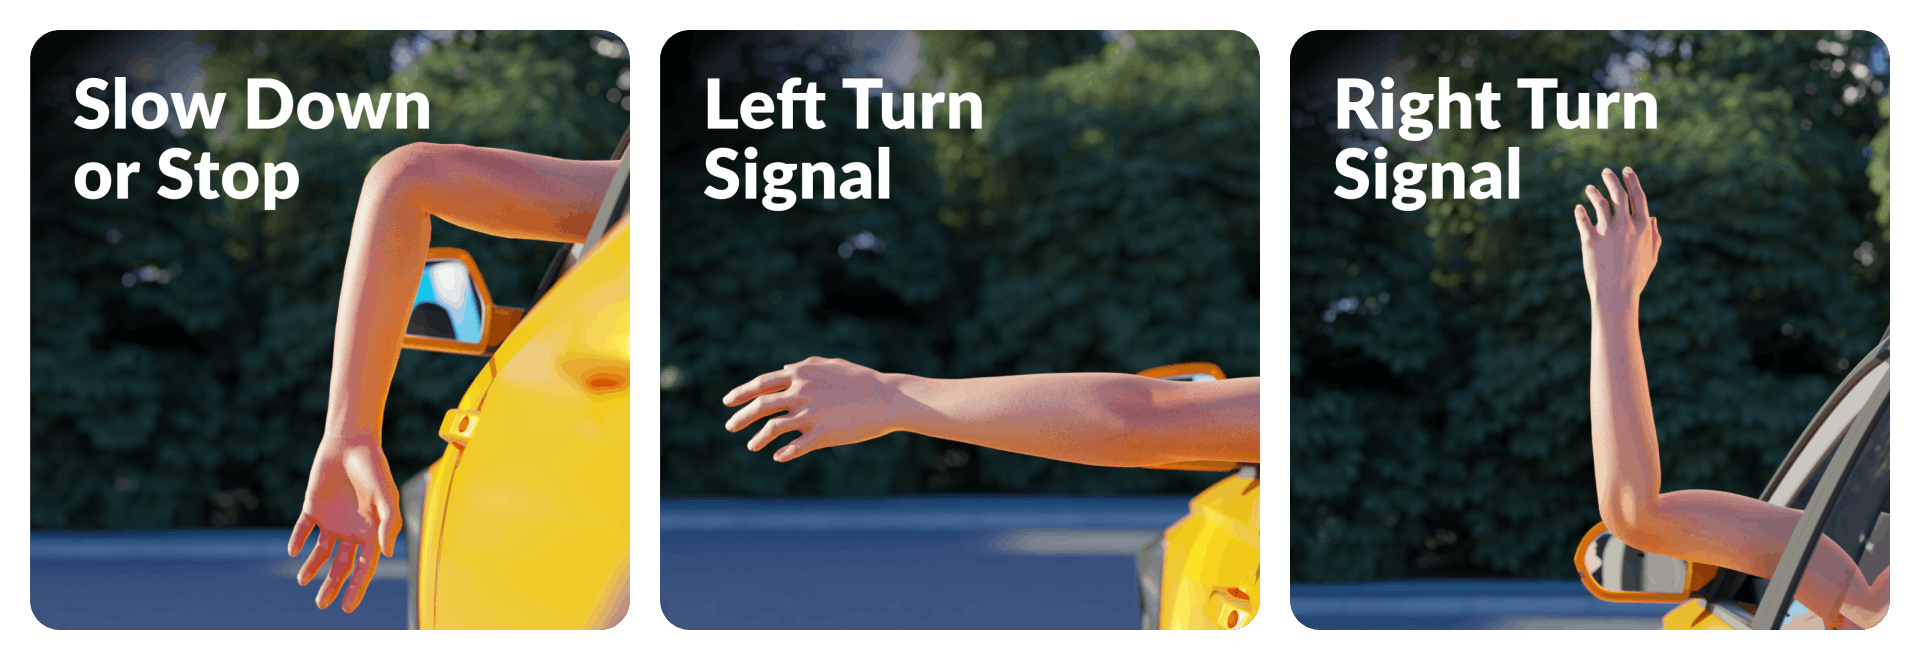 driving test hand signal